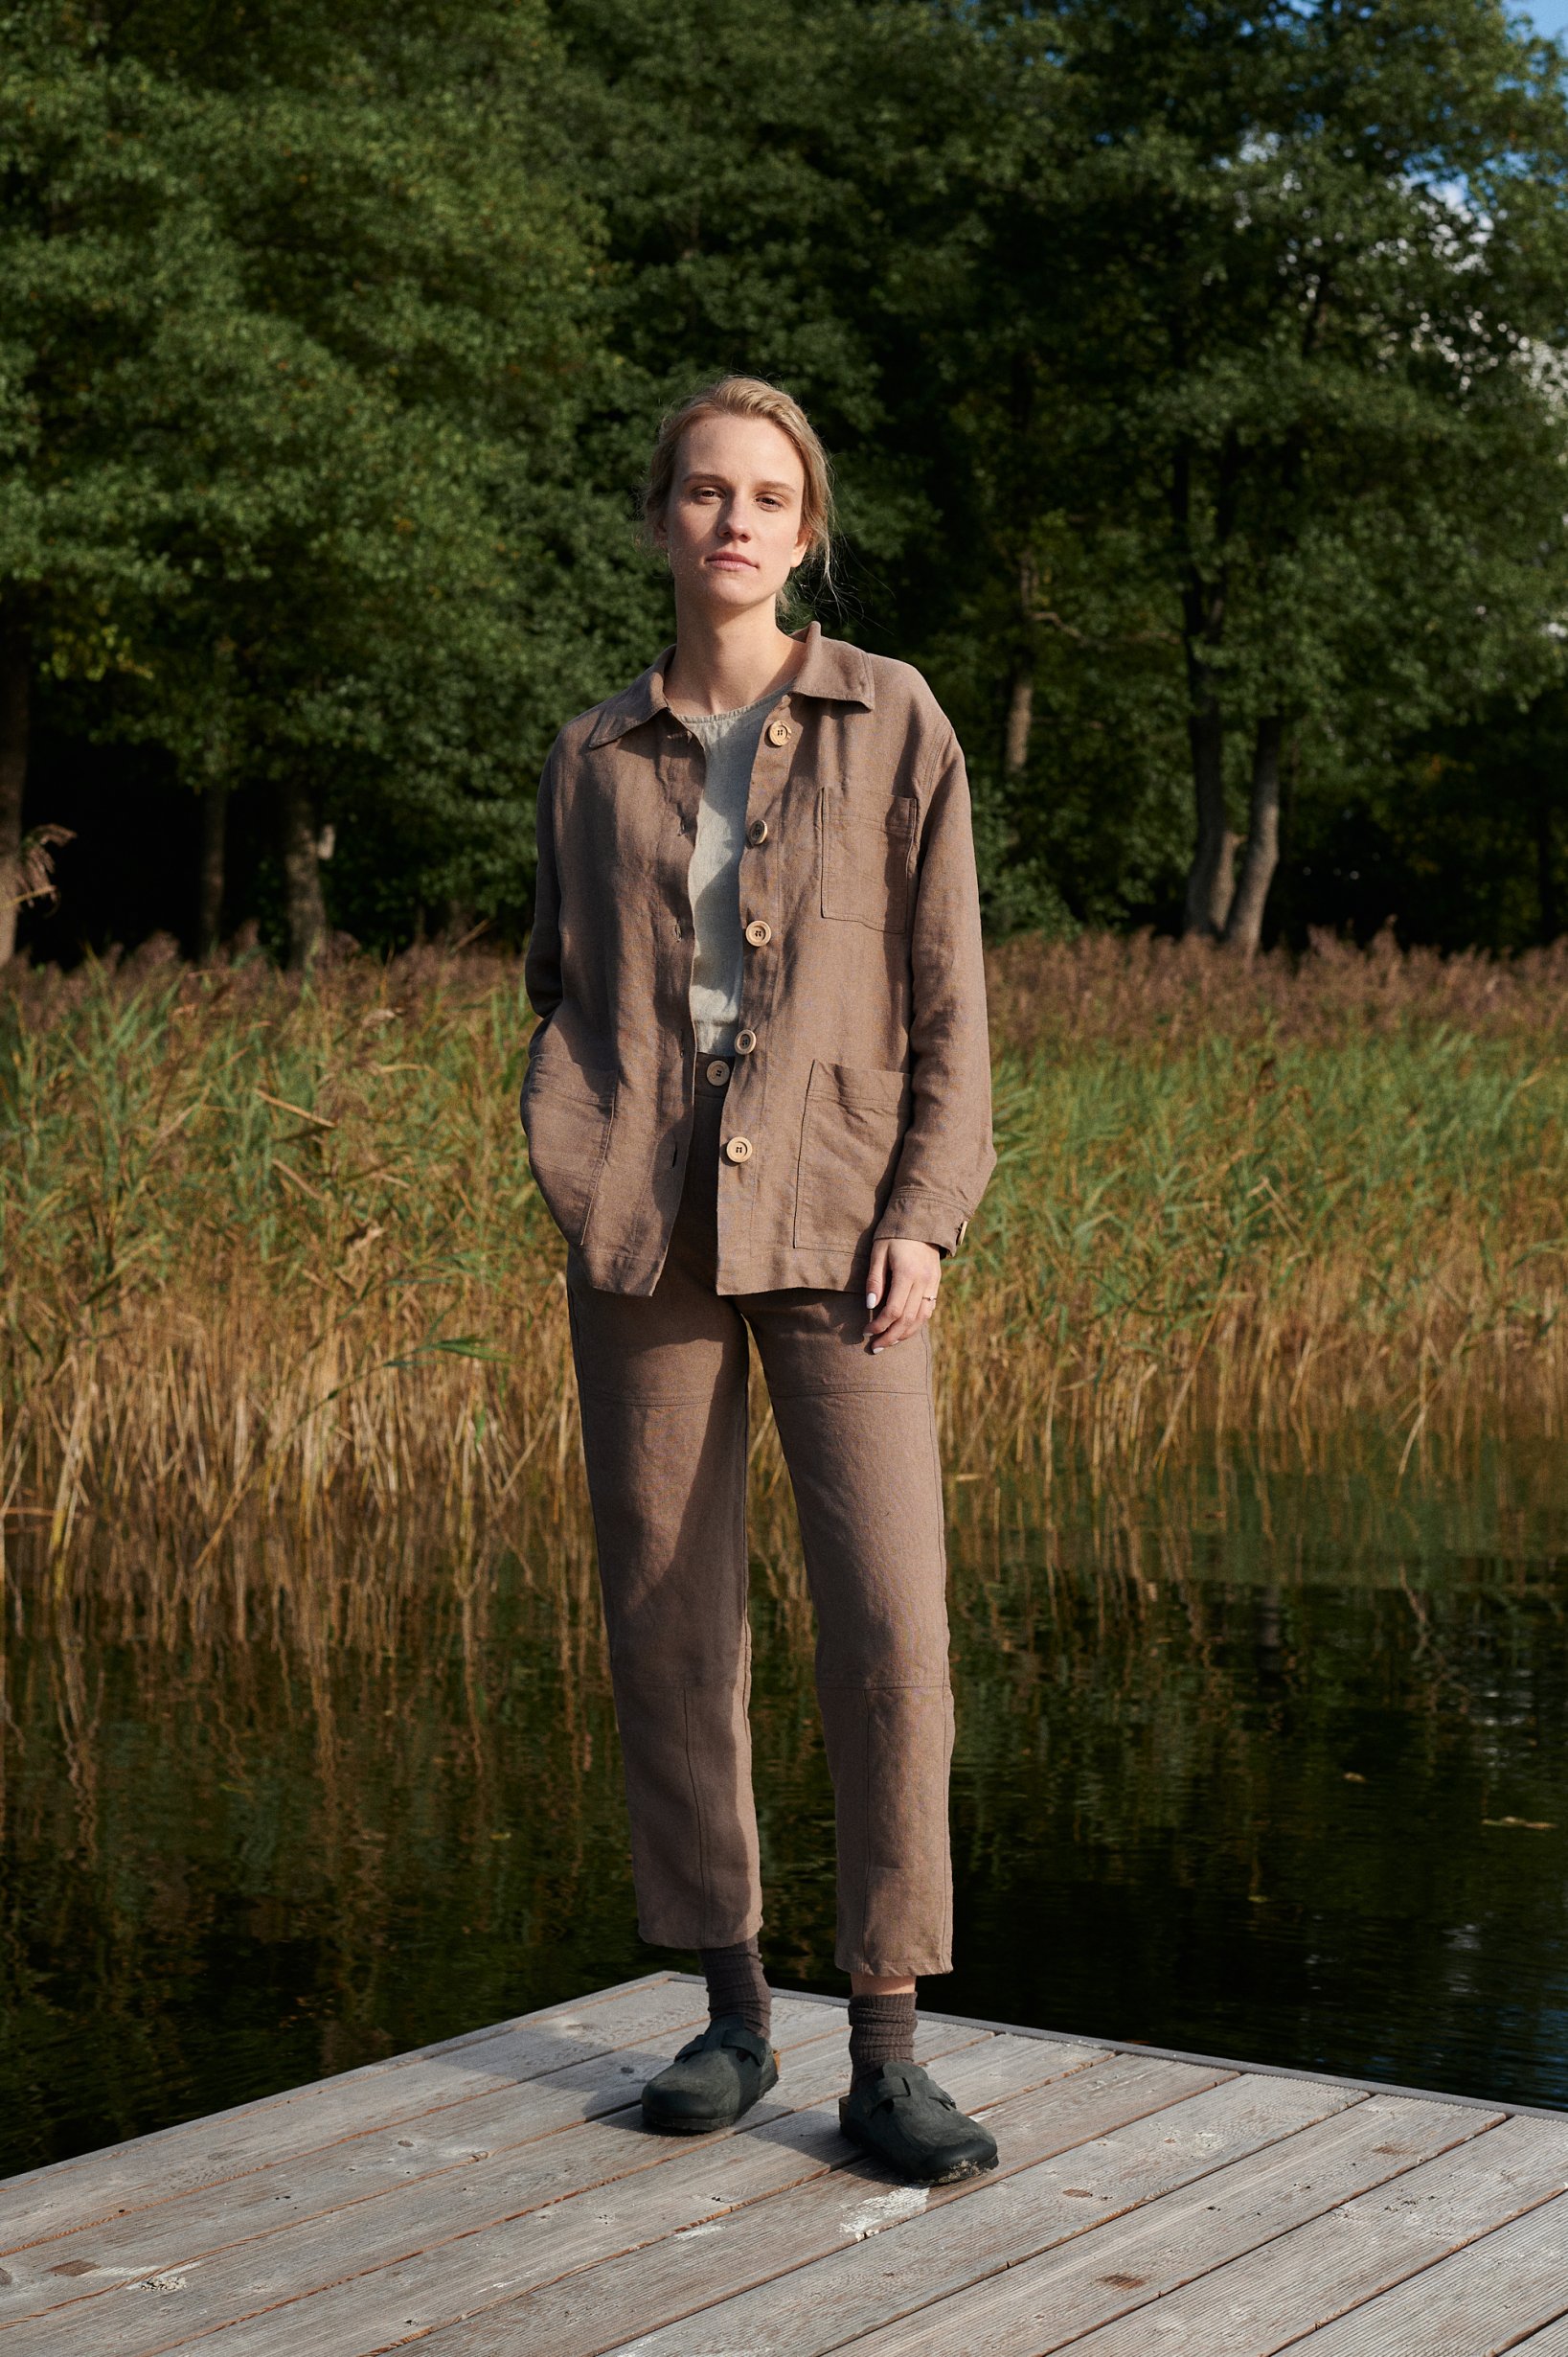 Model wearing an unbuttoned brown linen utility jacket and pants outfit